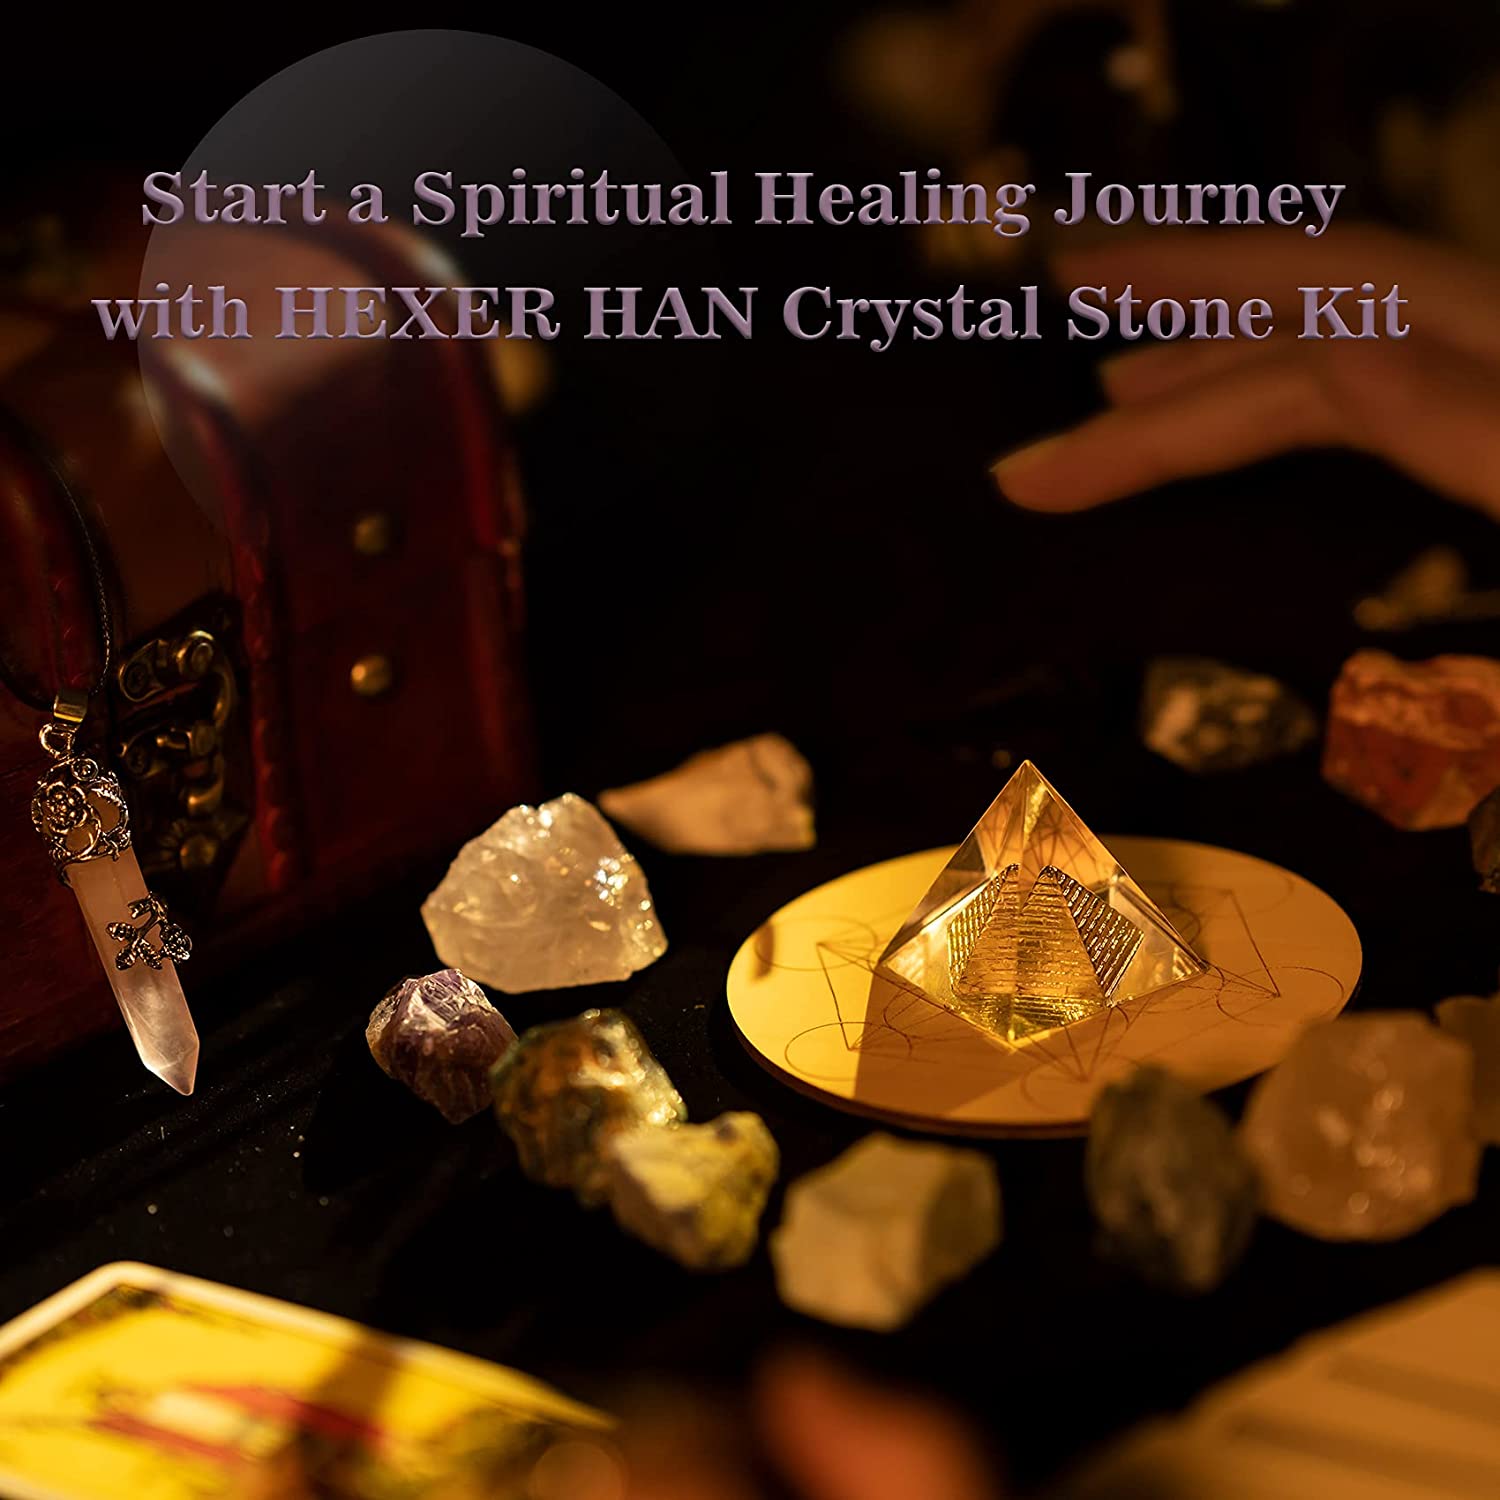 Natural Healing Stones Gift Box - The Witchy Gypsy